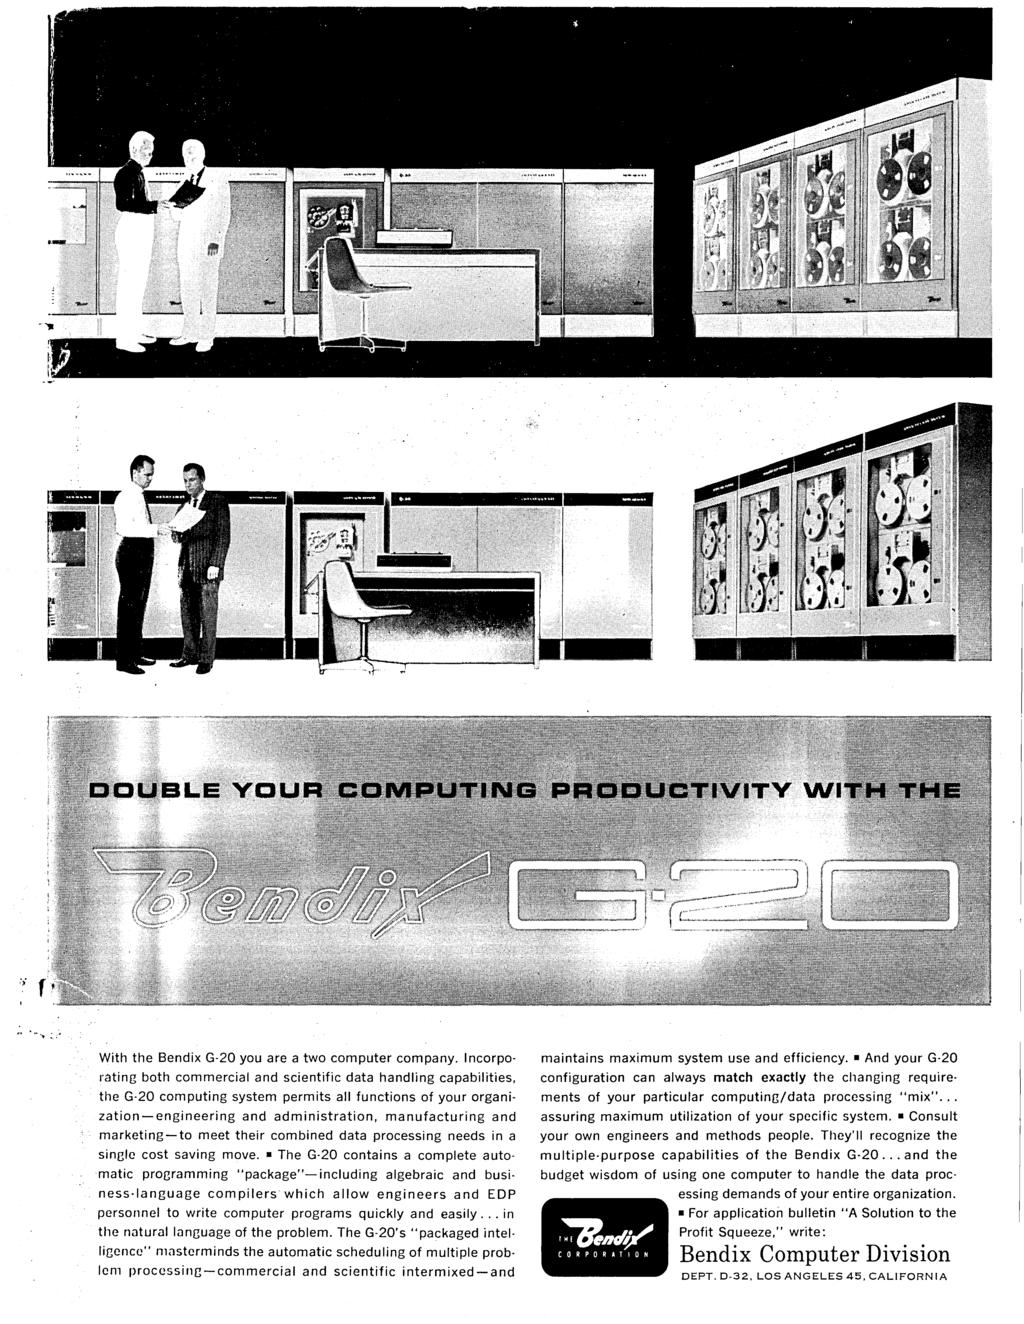 .... '-'.:.;. With the Bendix G-20 you are a two computer company.